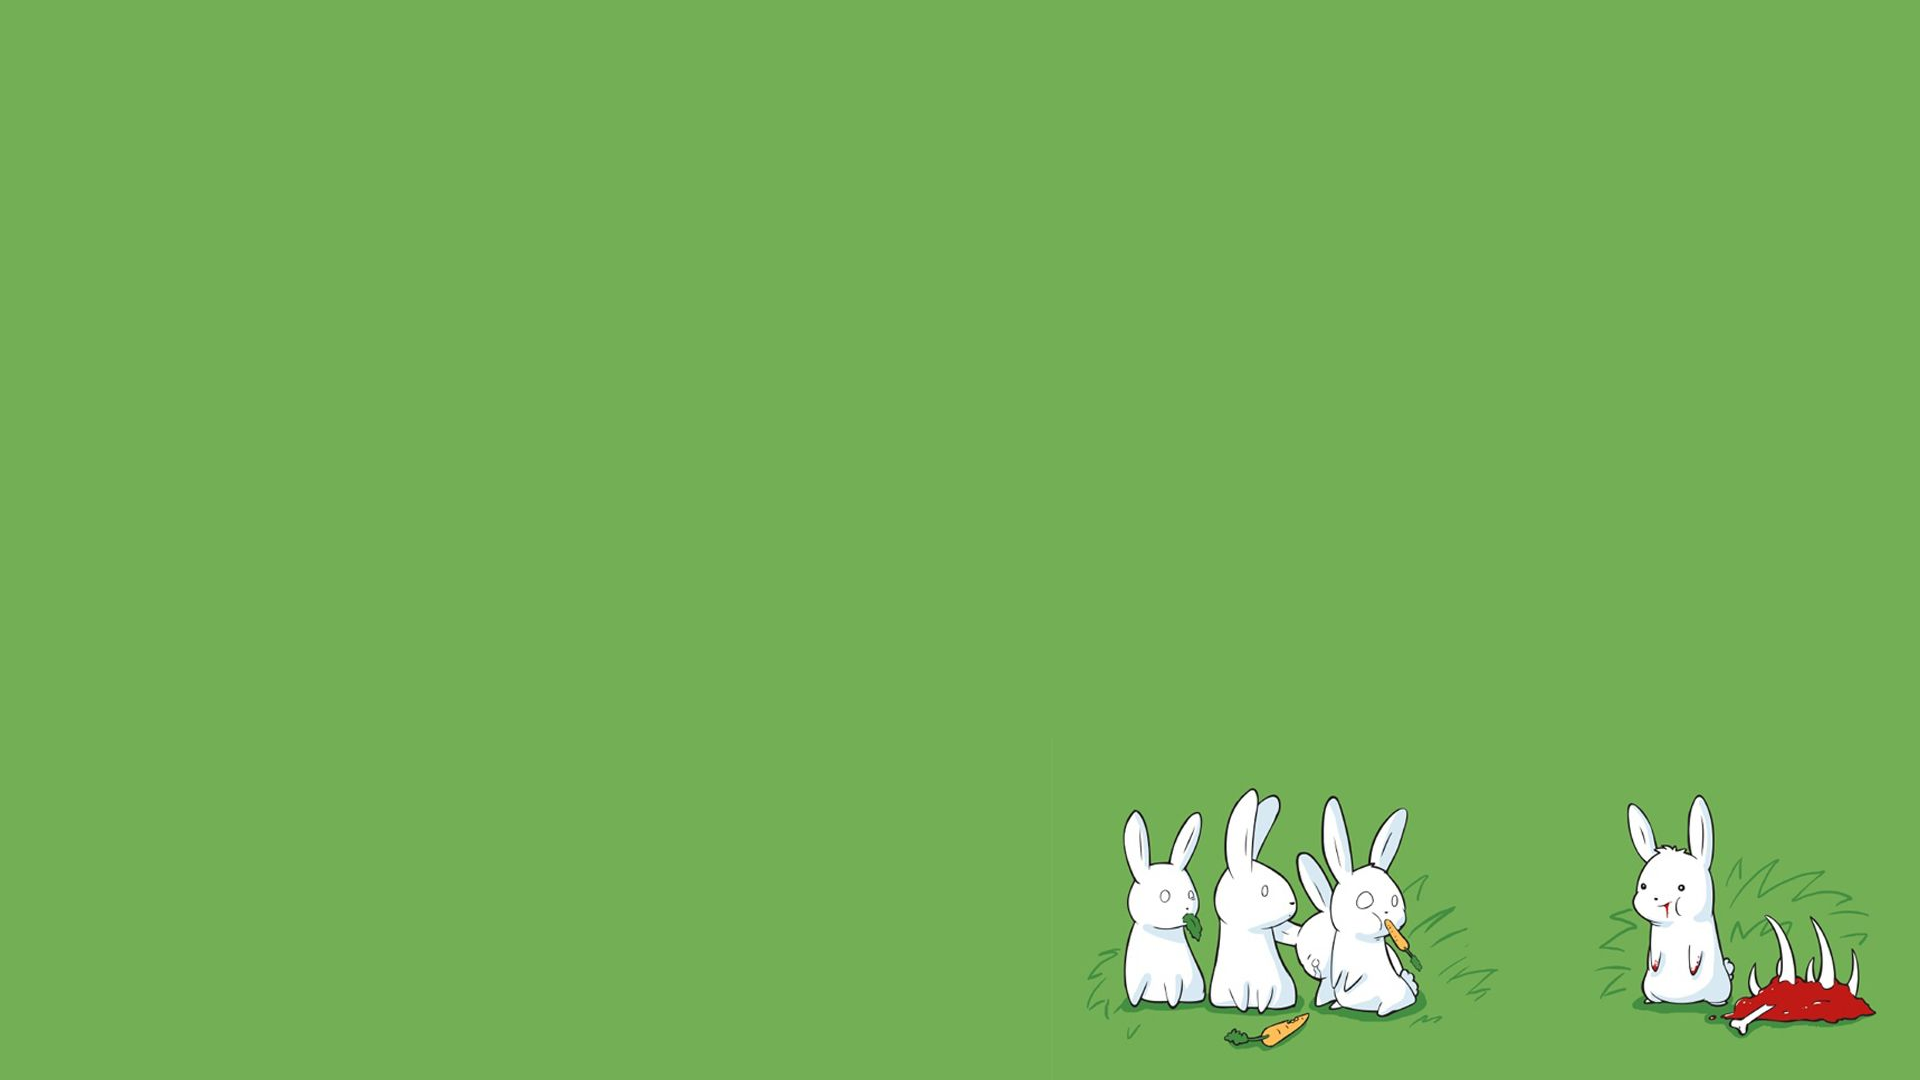 Rabbits Meat Humor Scared Rabbits Green 1920x1080